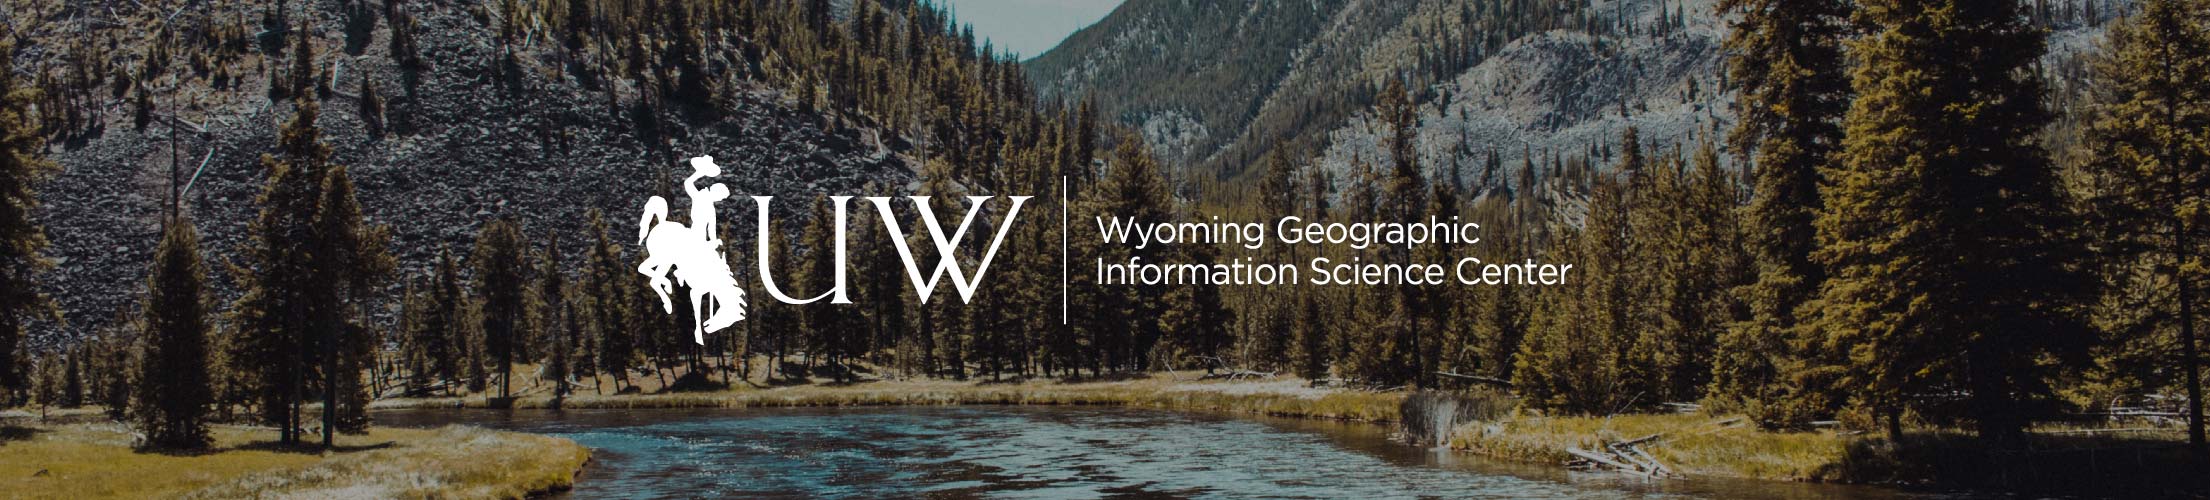 WyGISC logo over drone, pronghorn, and maps photos